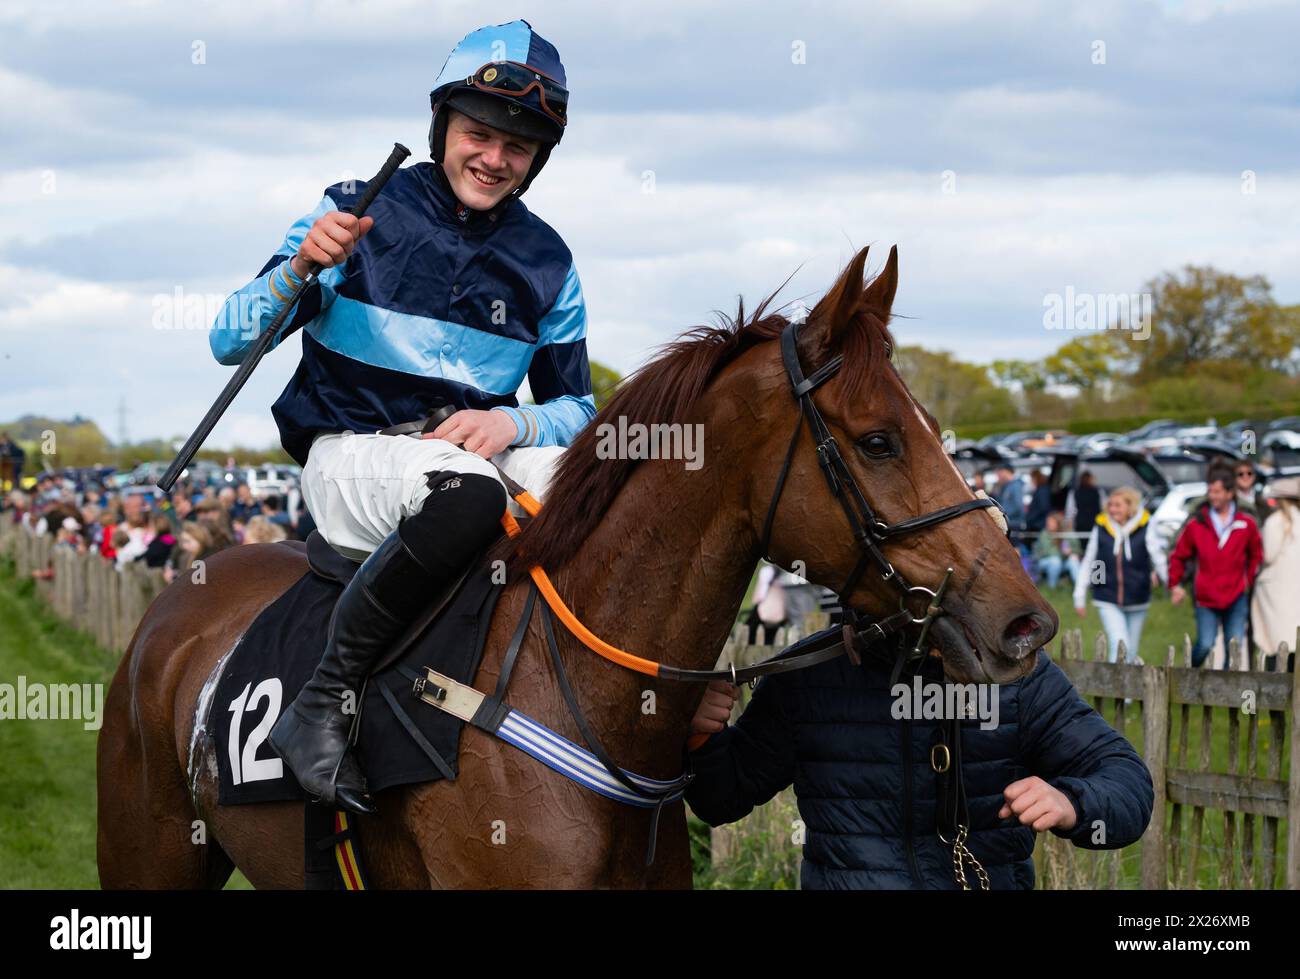 Chaddesley Corbett Racecourse, Worcestershire, Saturday 20th April 2024; Jeux D'Eau and jockey Huw Edwards win the 2024 running of the Lady Dudley Cup Mens Open Race for trainer Laura Richardson and owners Laura Richardson & David Heys . Credit JTW Equine Images / Alamy Live News. Stock Photo